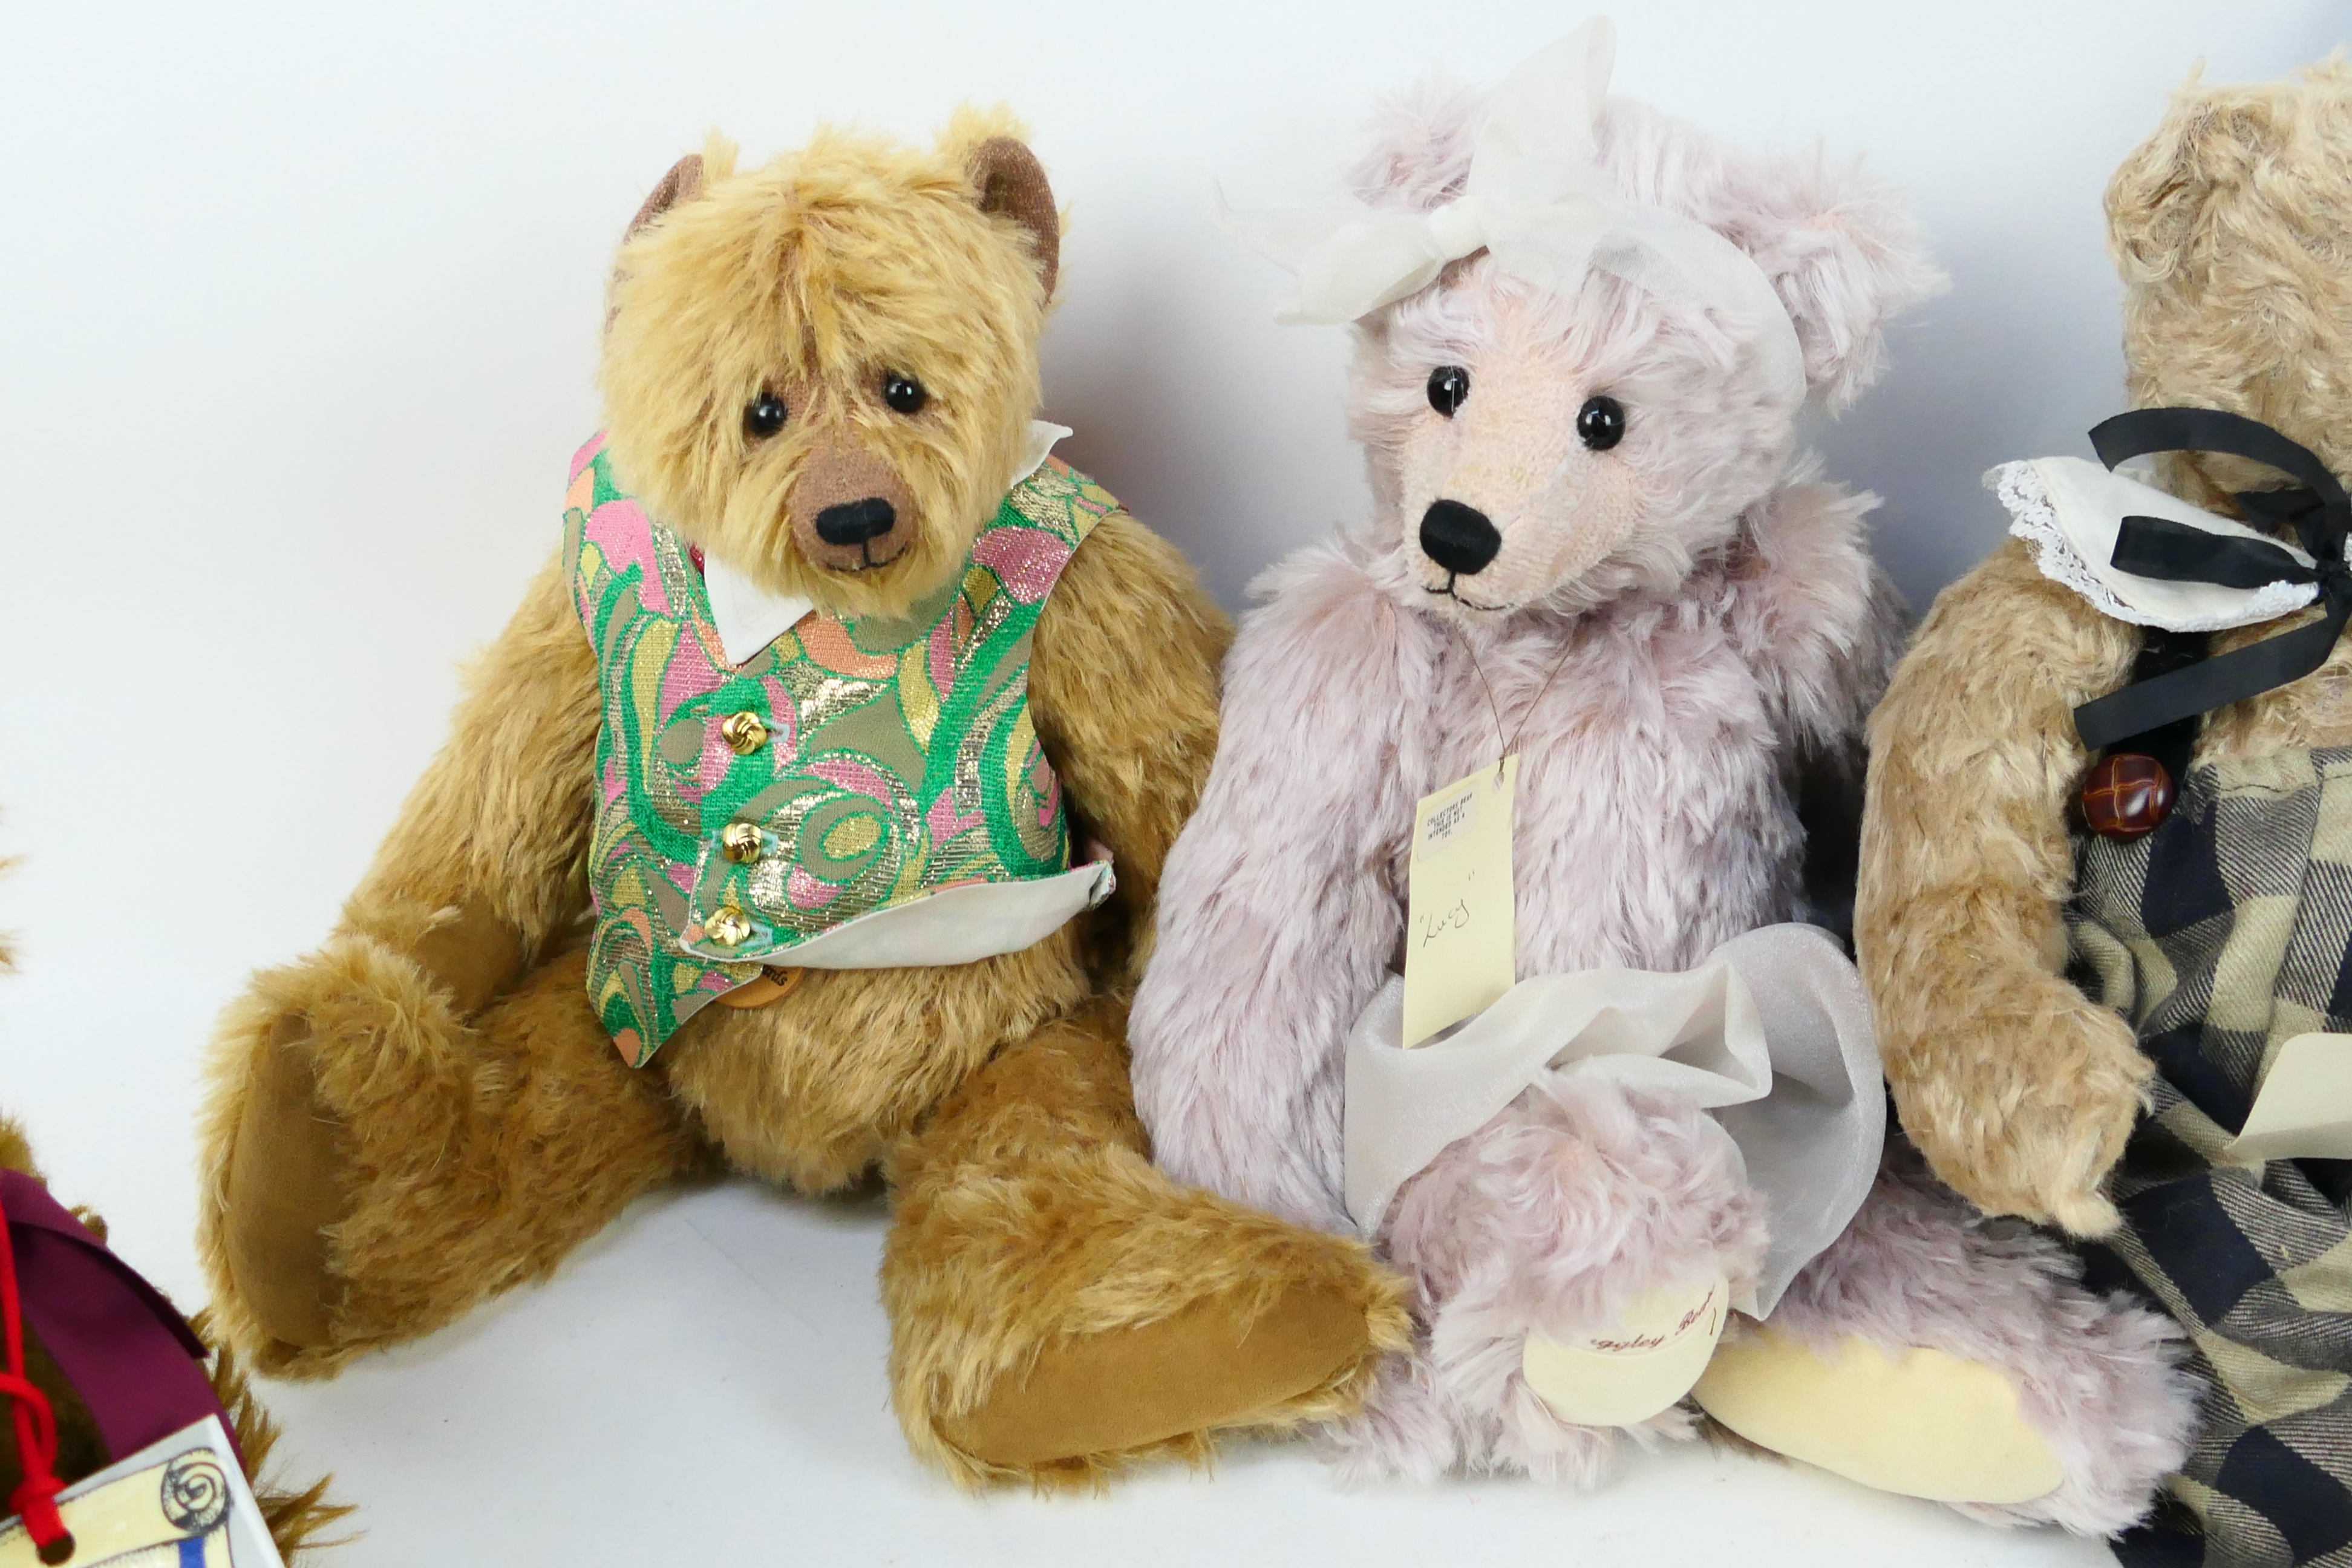 Bilbo Bears, Cottage Collectibles, The Teddy Bear Shop, DaDo Crafts, Juggley Bears, - Image 3 of 5